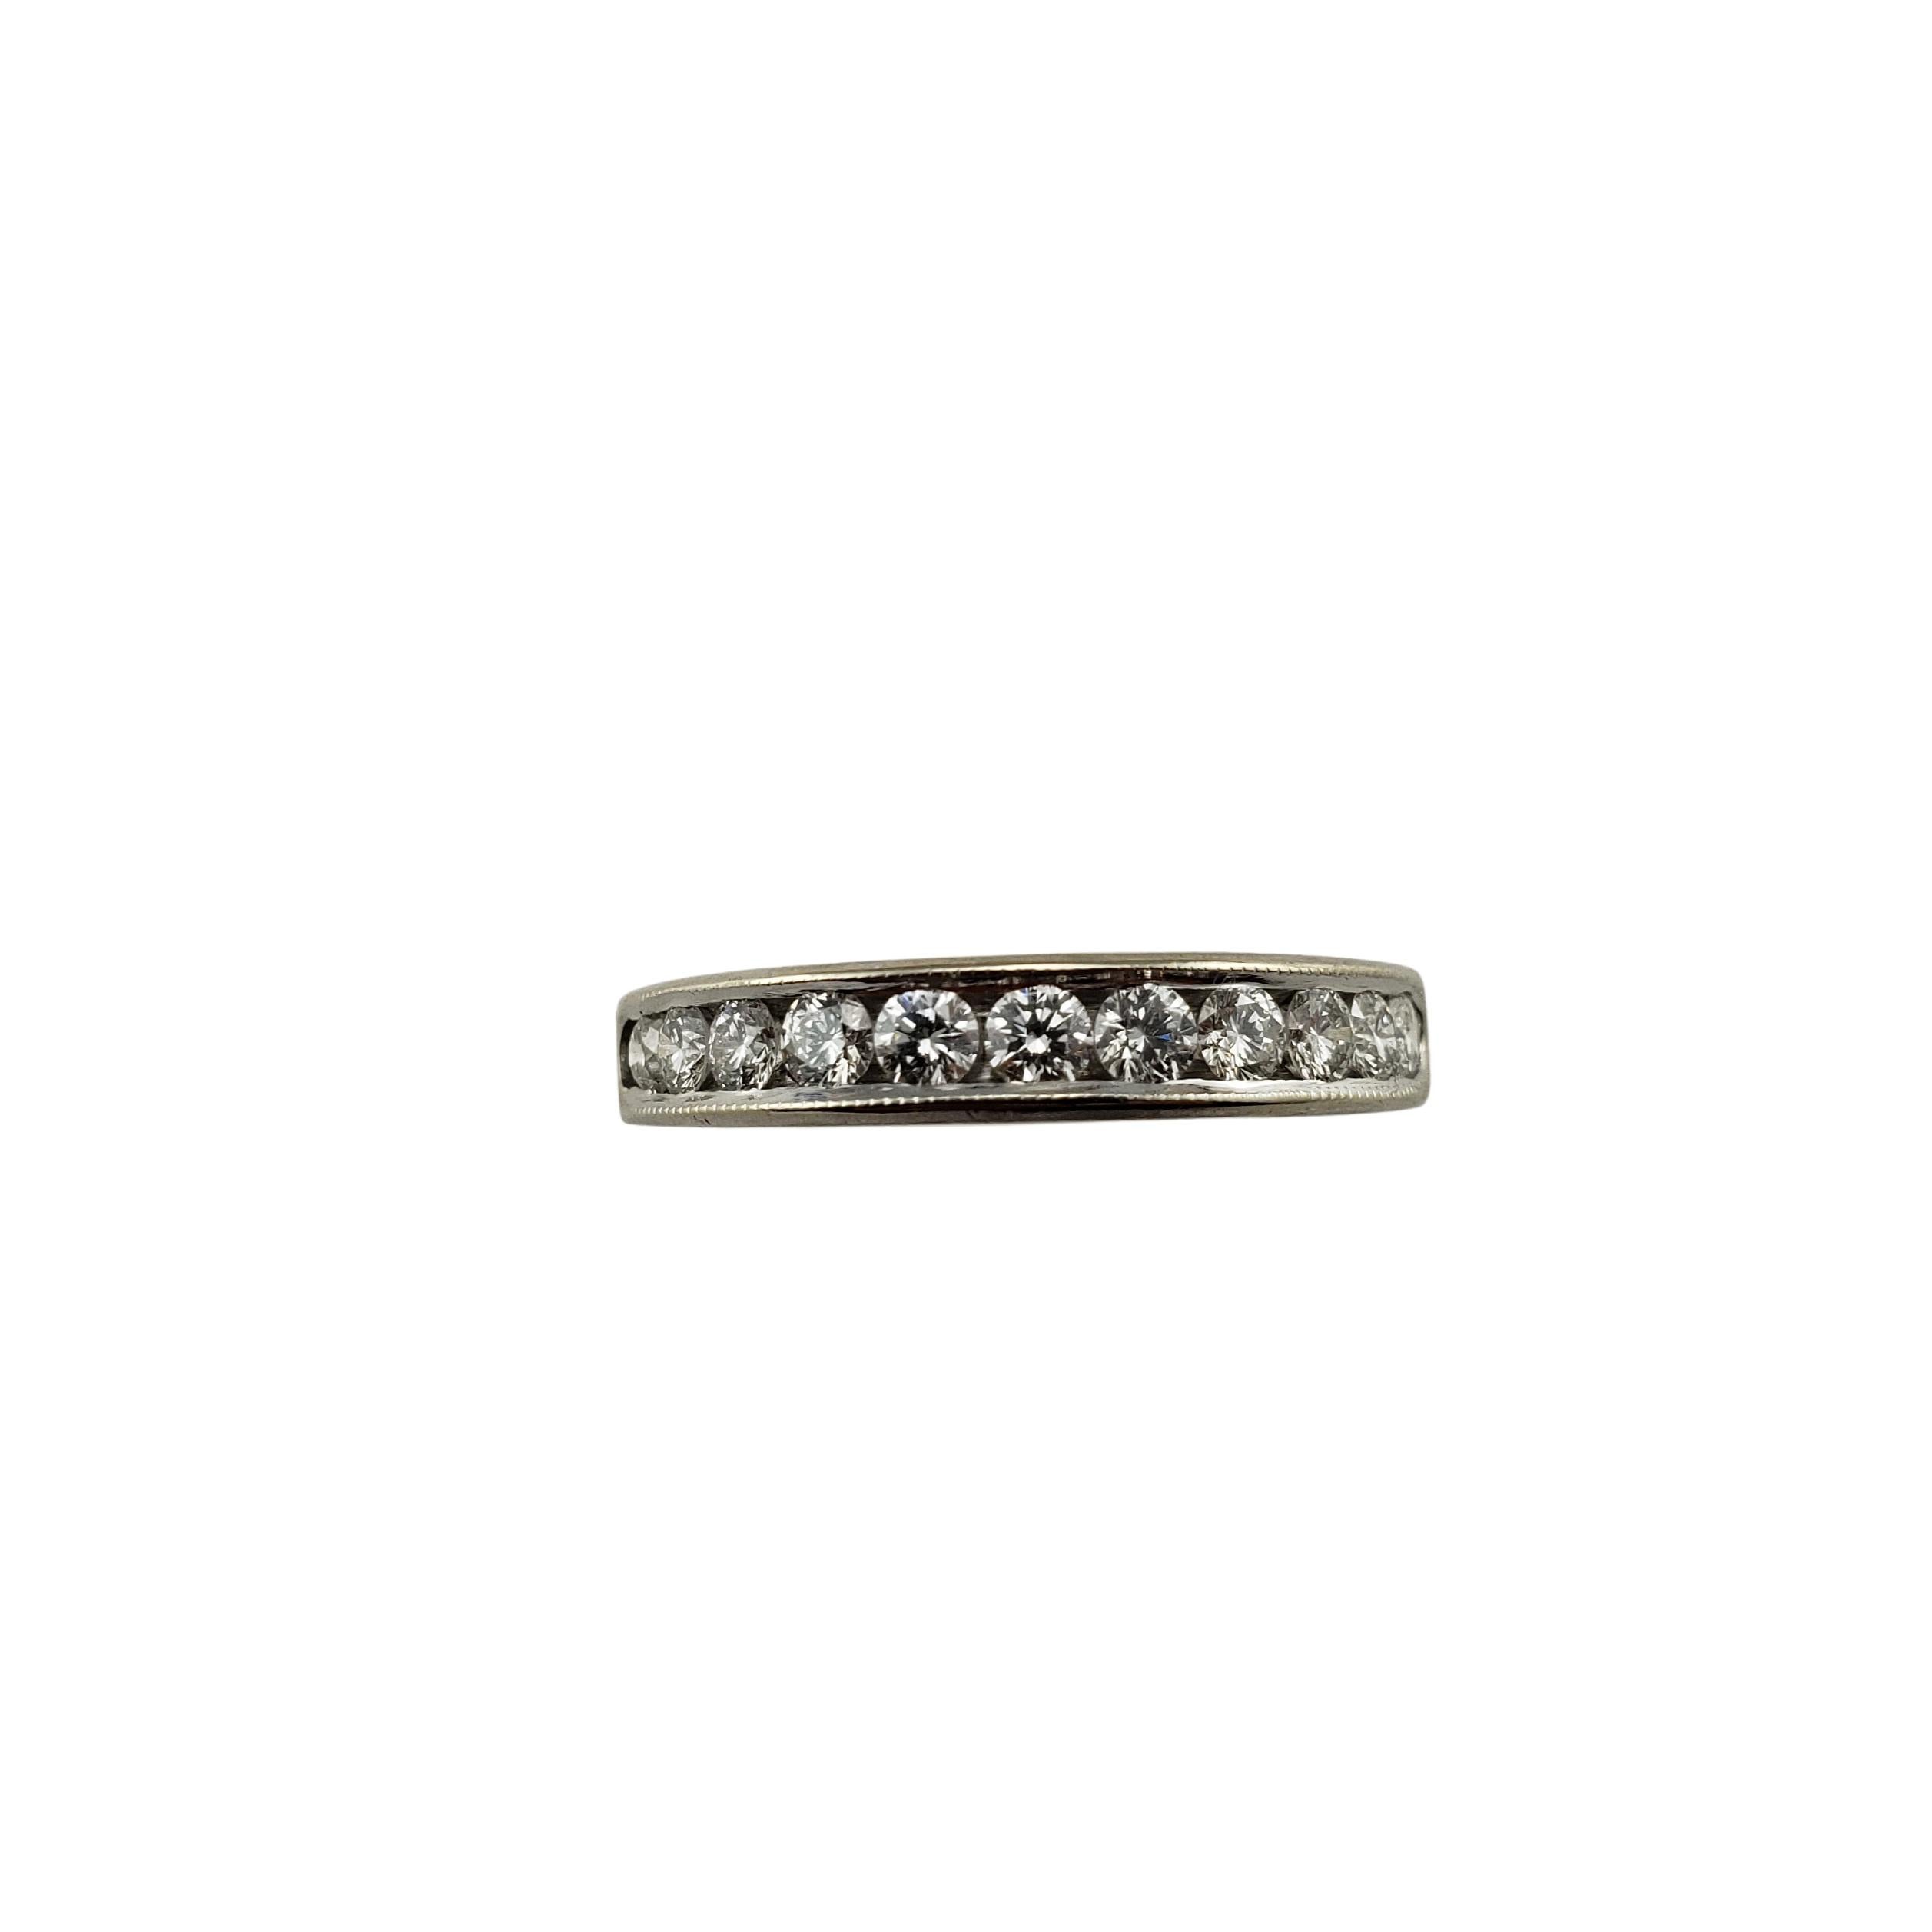 Vintage 14 Karat White Gold Diamond Wedding Band Ring Size 6-

This sparkling band features 11 round brilliant cut diamonds set in beautifully detailed 14K white gold. Width: 3.5 mm.
Shank: 2.5 mm.

Approximate total diamond weight: .55 ct.

Diamond